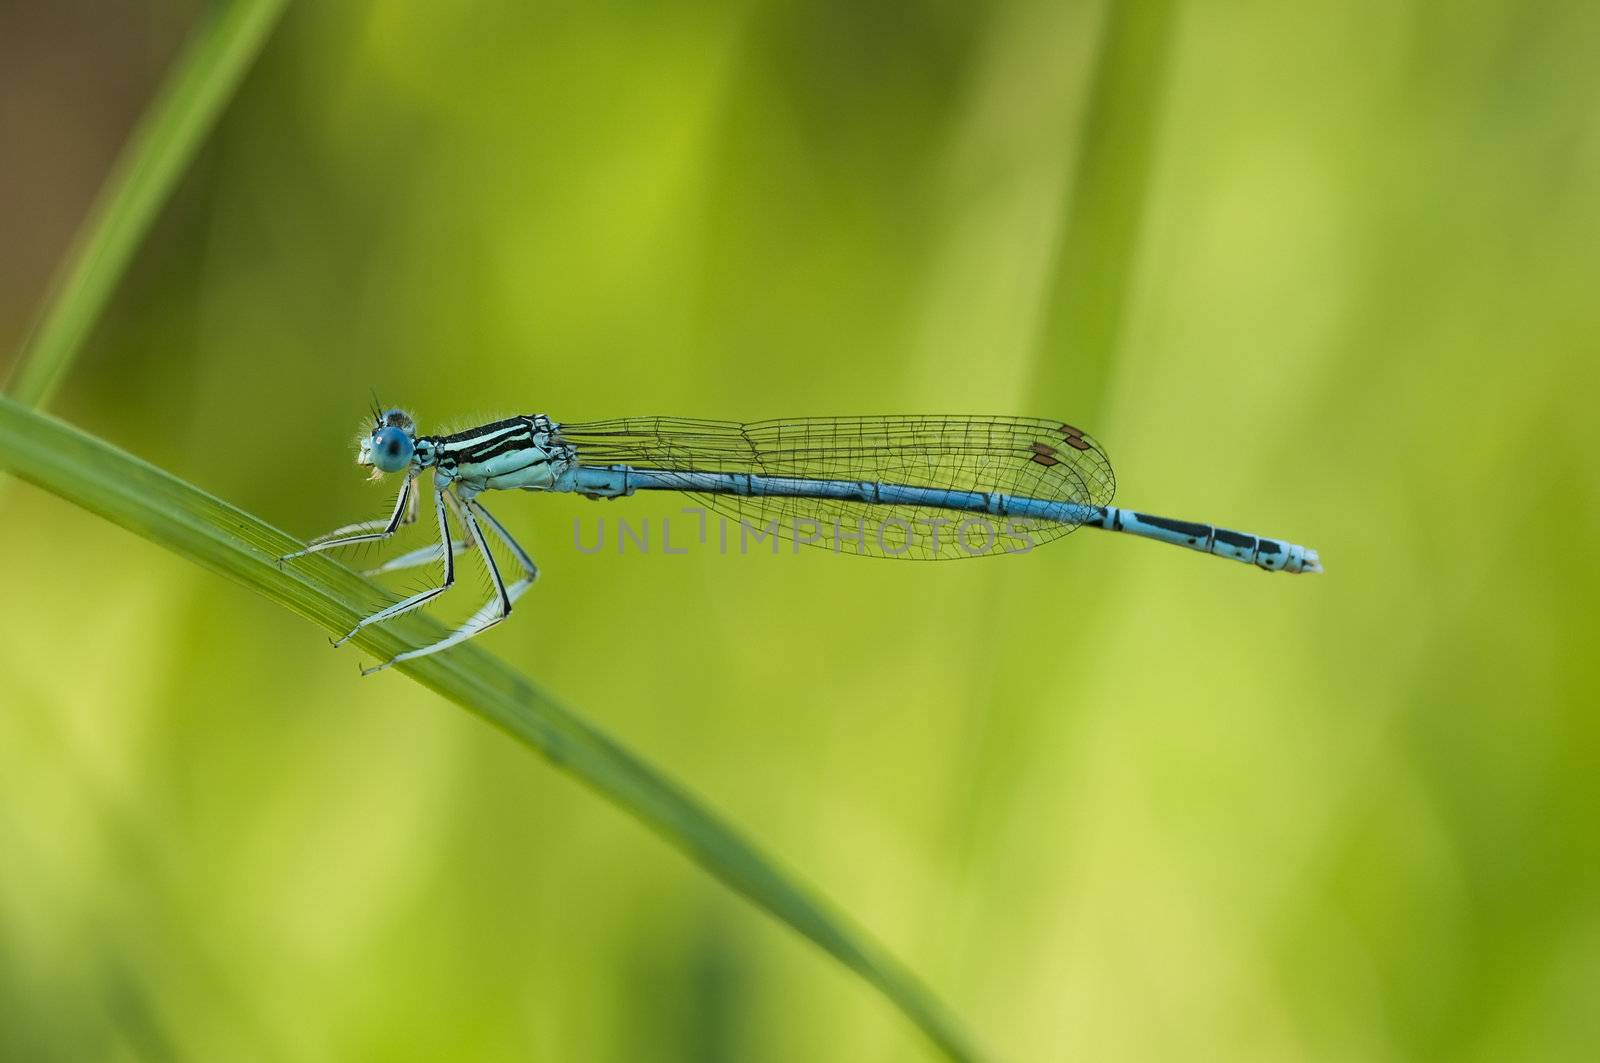 Blue damselfly perched on a blade of grass by AlessandroZocc